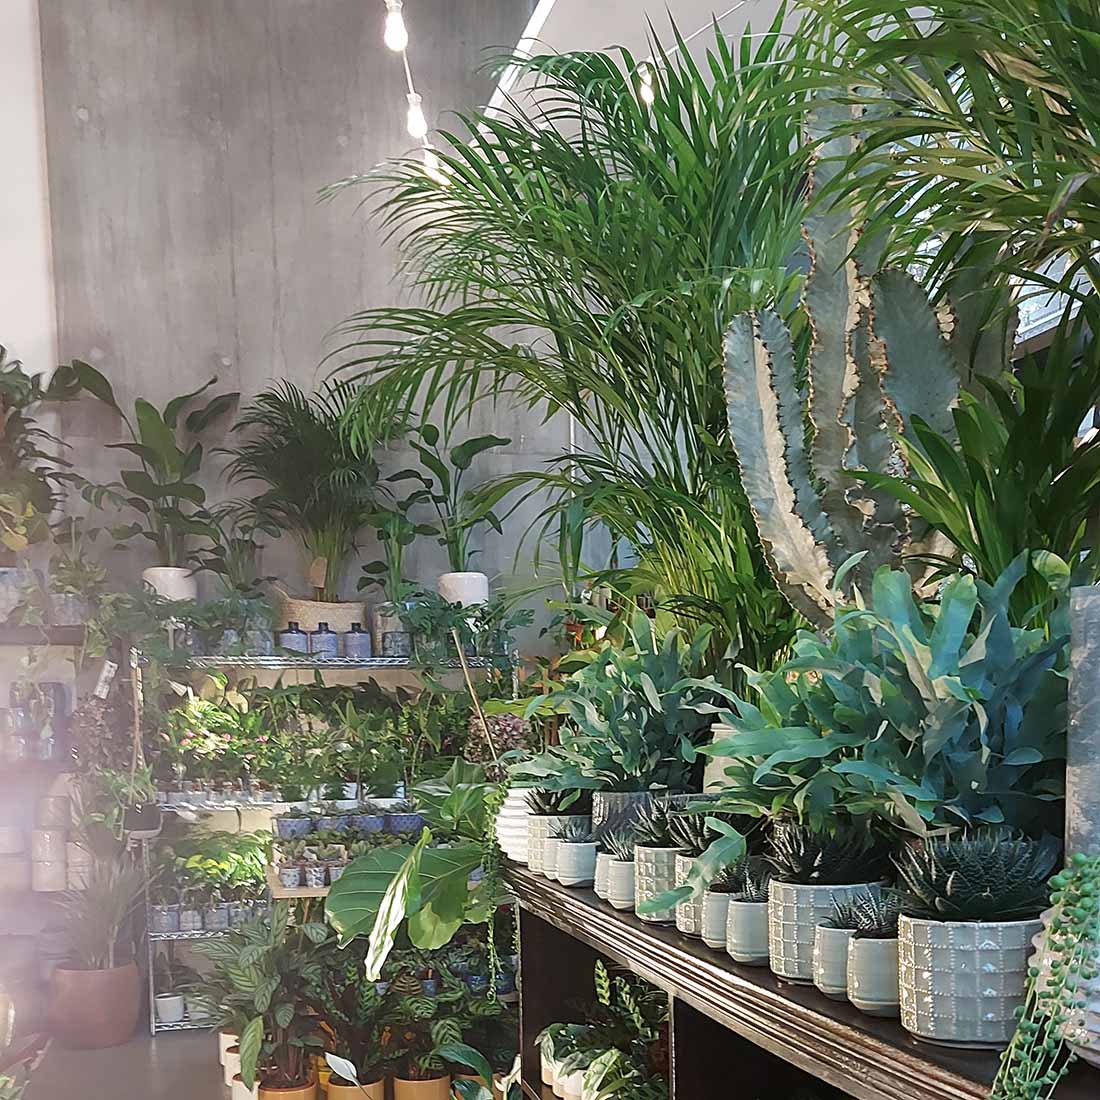 25 Best Plant Stands For Displaying Your Houseplants - Shop Every